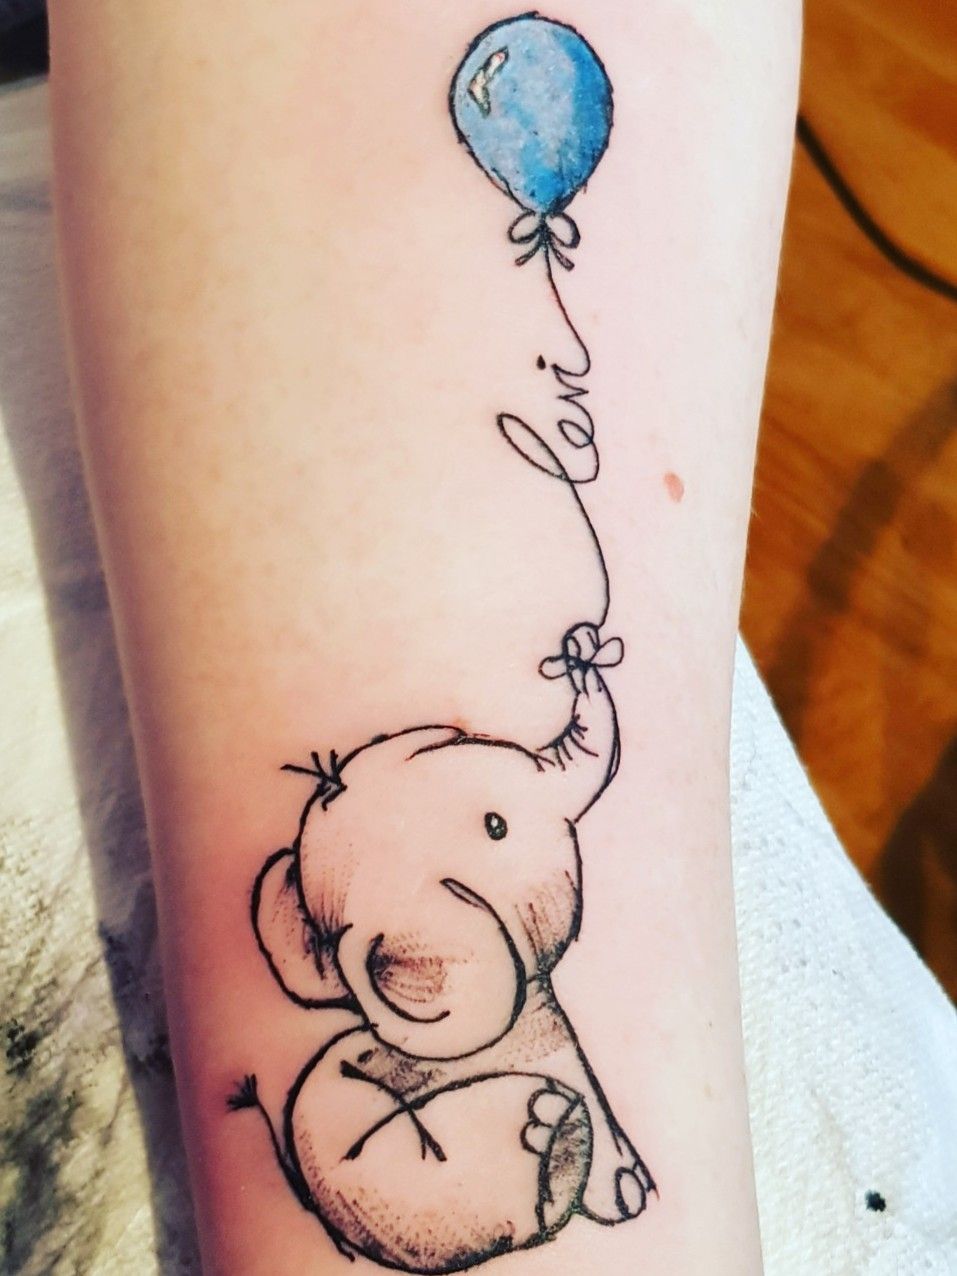 Baby elephant and balloons tattoo  West Coast Tattoos  Facebook